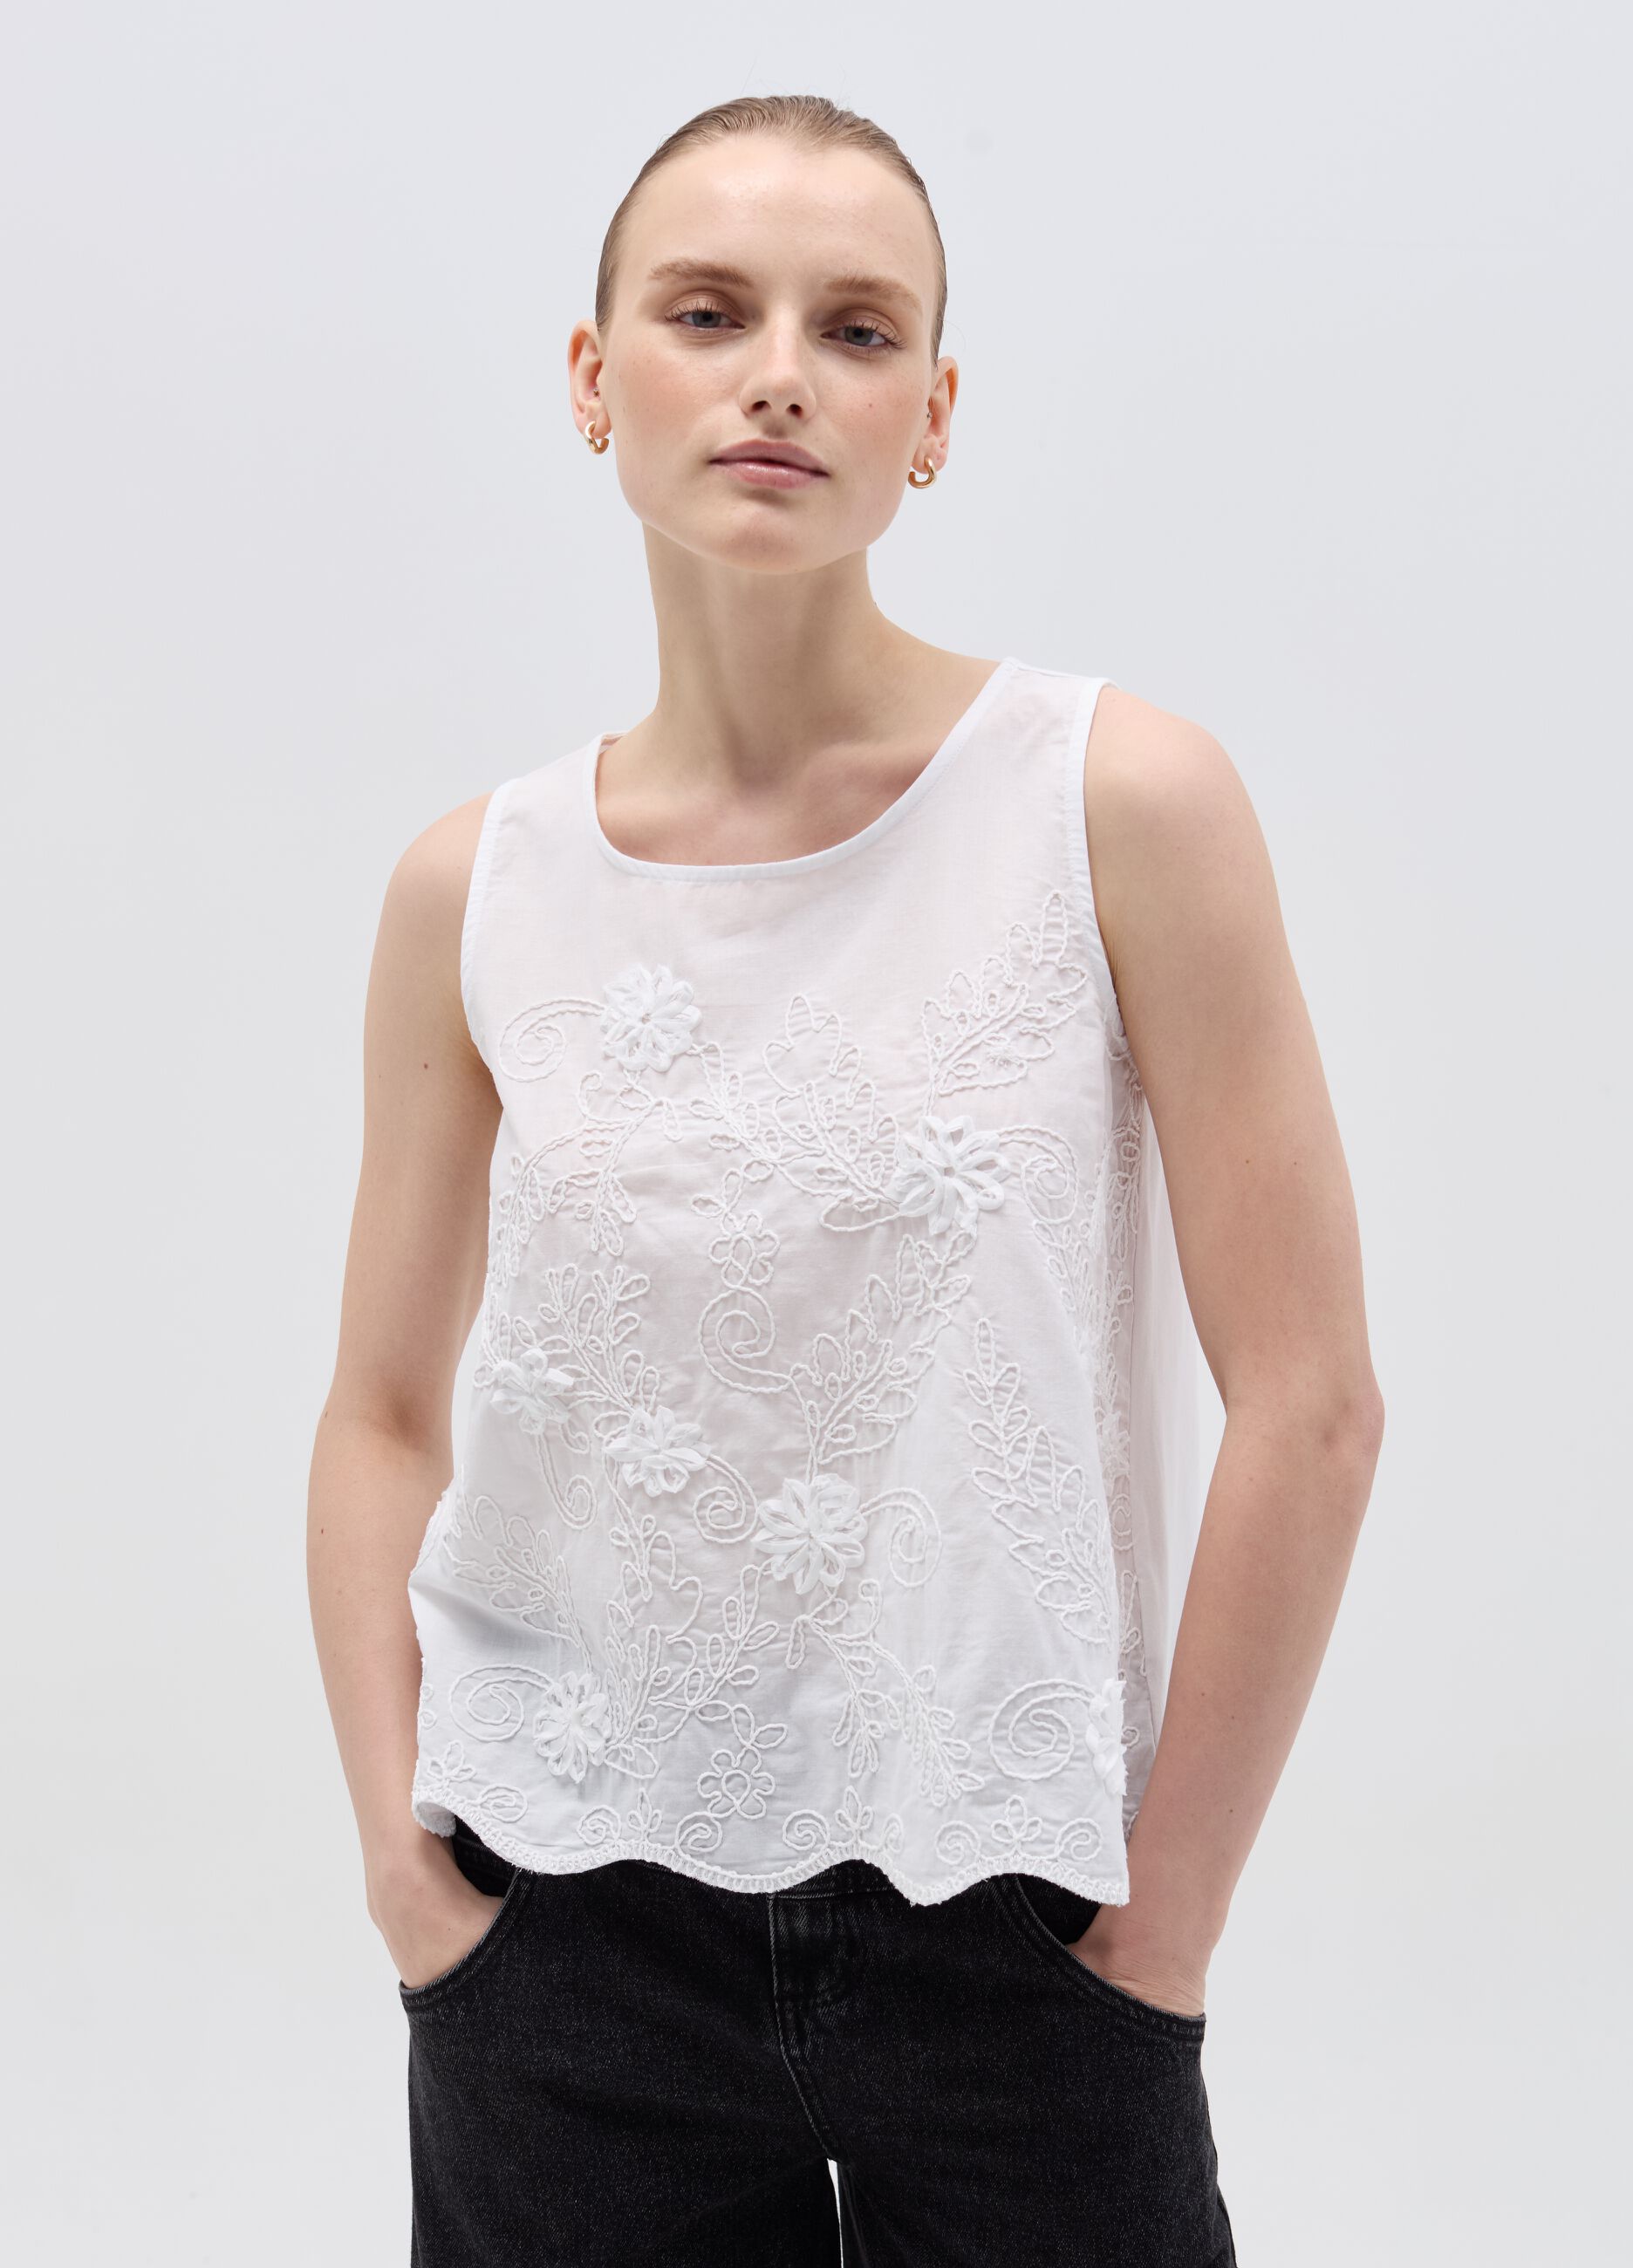 Cotton tank top with floral embroidery